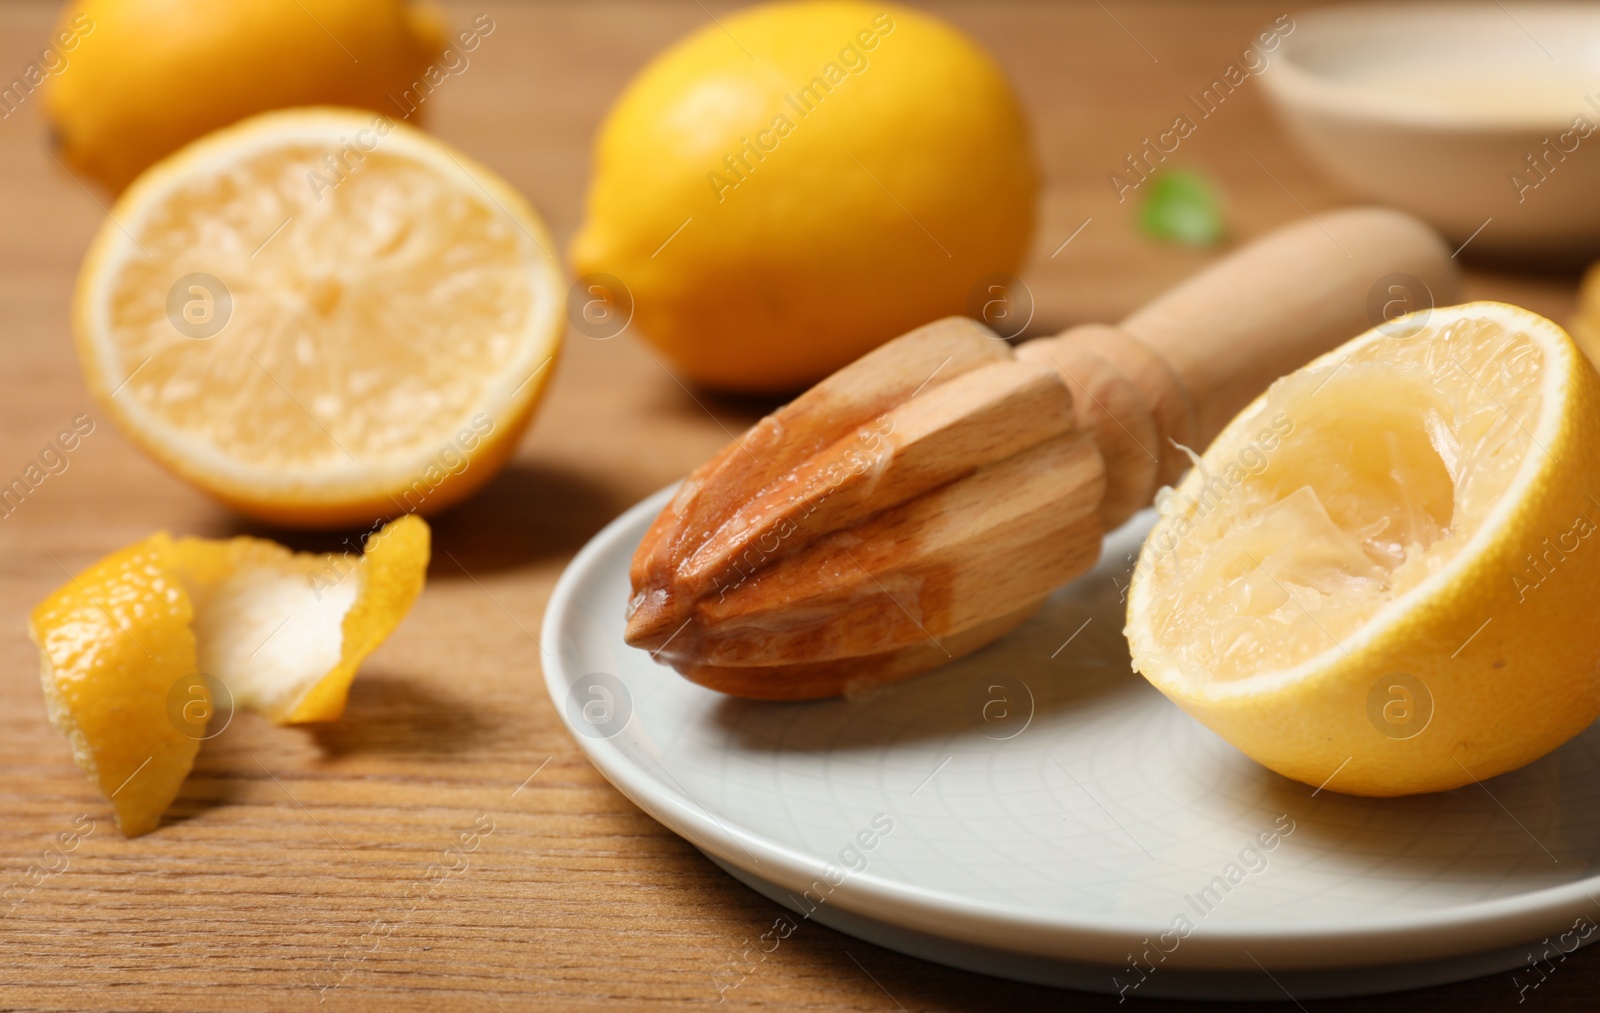 Photo of Plate with wooden juicer and lemon half on table. Refreshing drink recipe